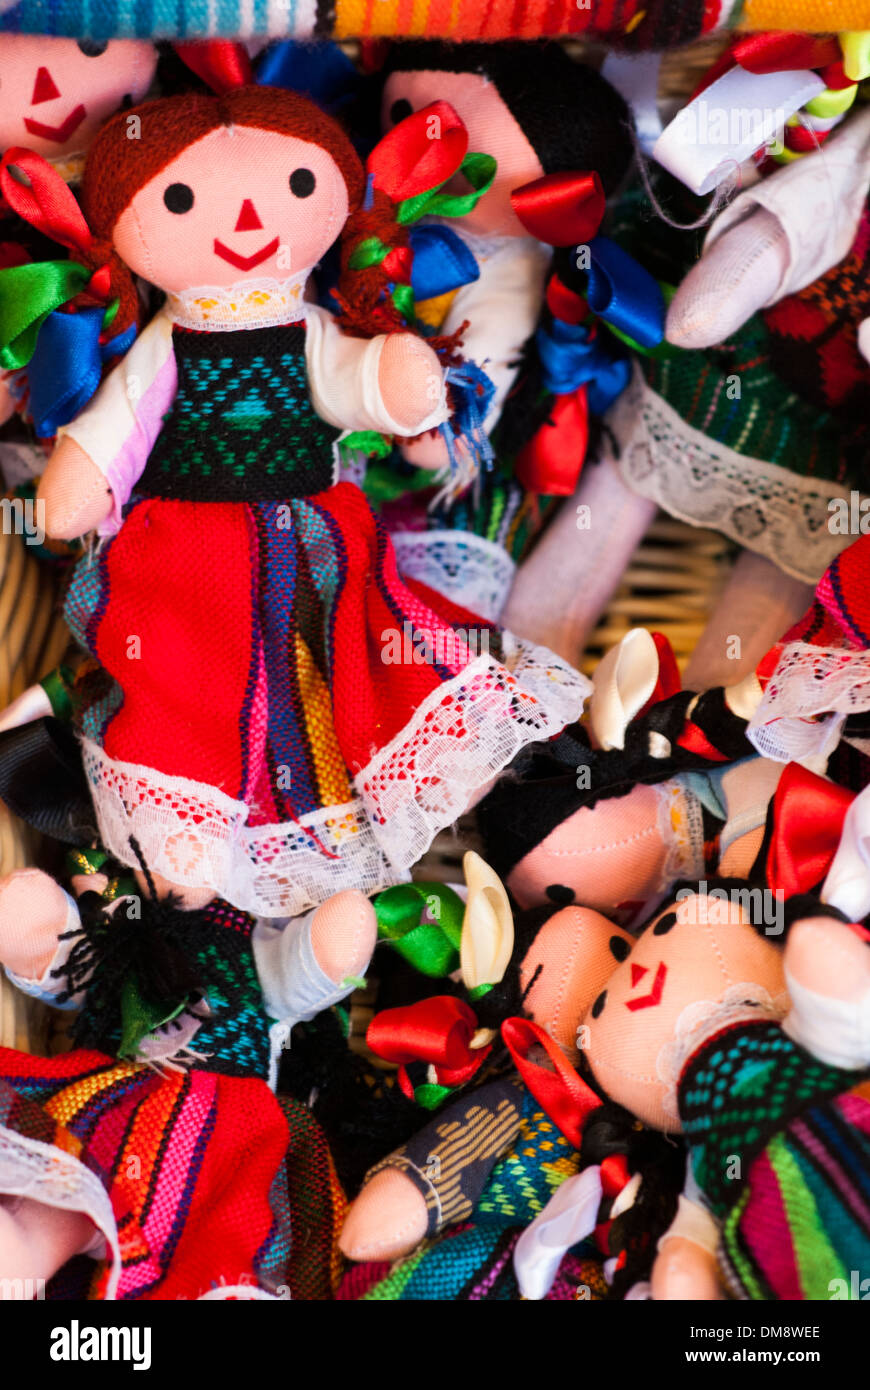 Dolls at a Mexican marketplace Stock Photo